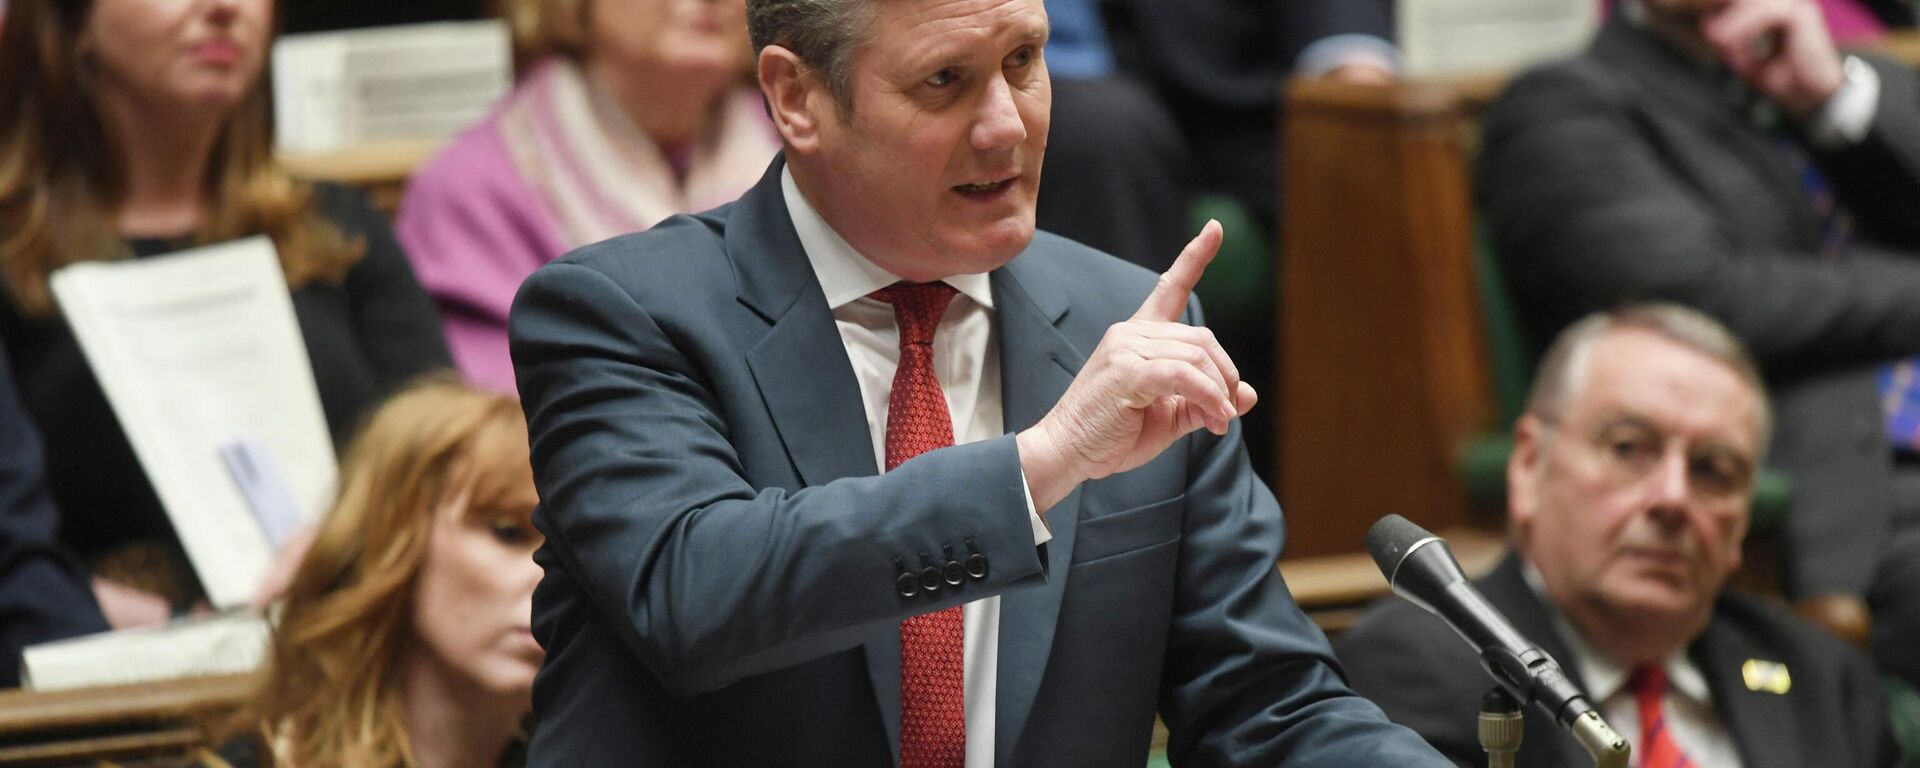 A handout photograph released by the UK Parliament shows Britain's  Labour Party leader Keir Starmer gesturing and speaking during during the Prime Minister's Questions (PMQ) session, in the House of Commons, in London, on April 27, 2022 - Sputnik International, 1920, 05.05.2022